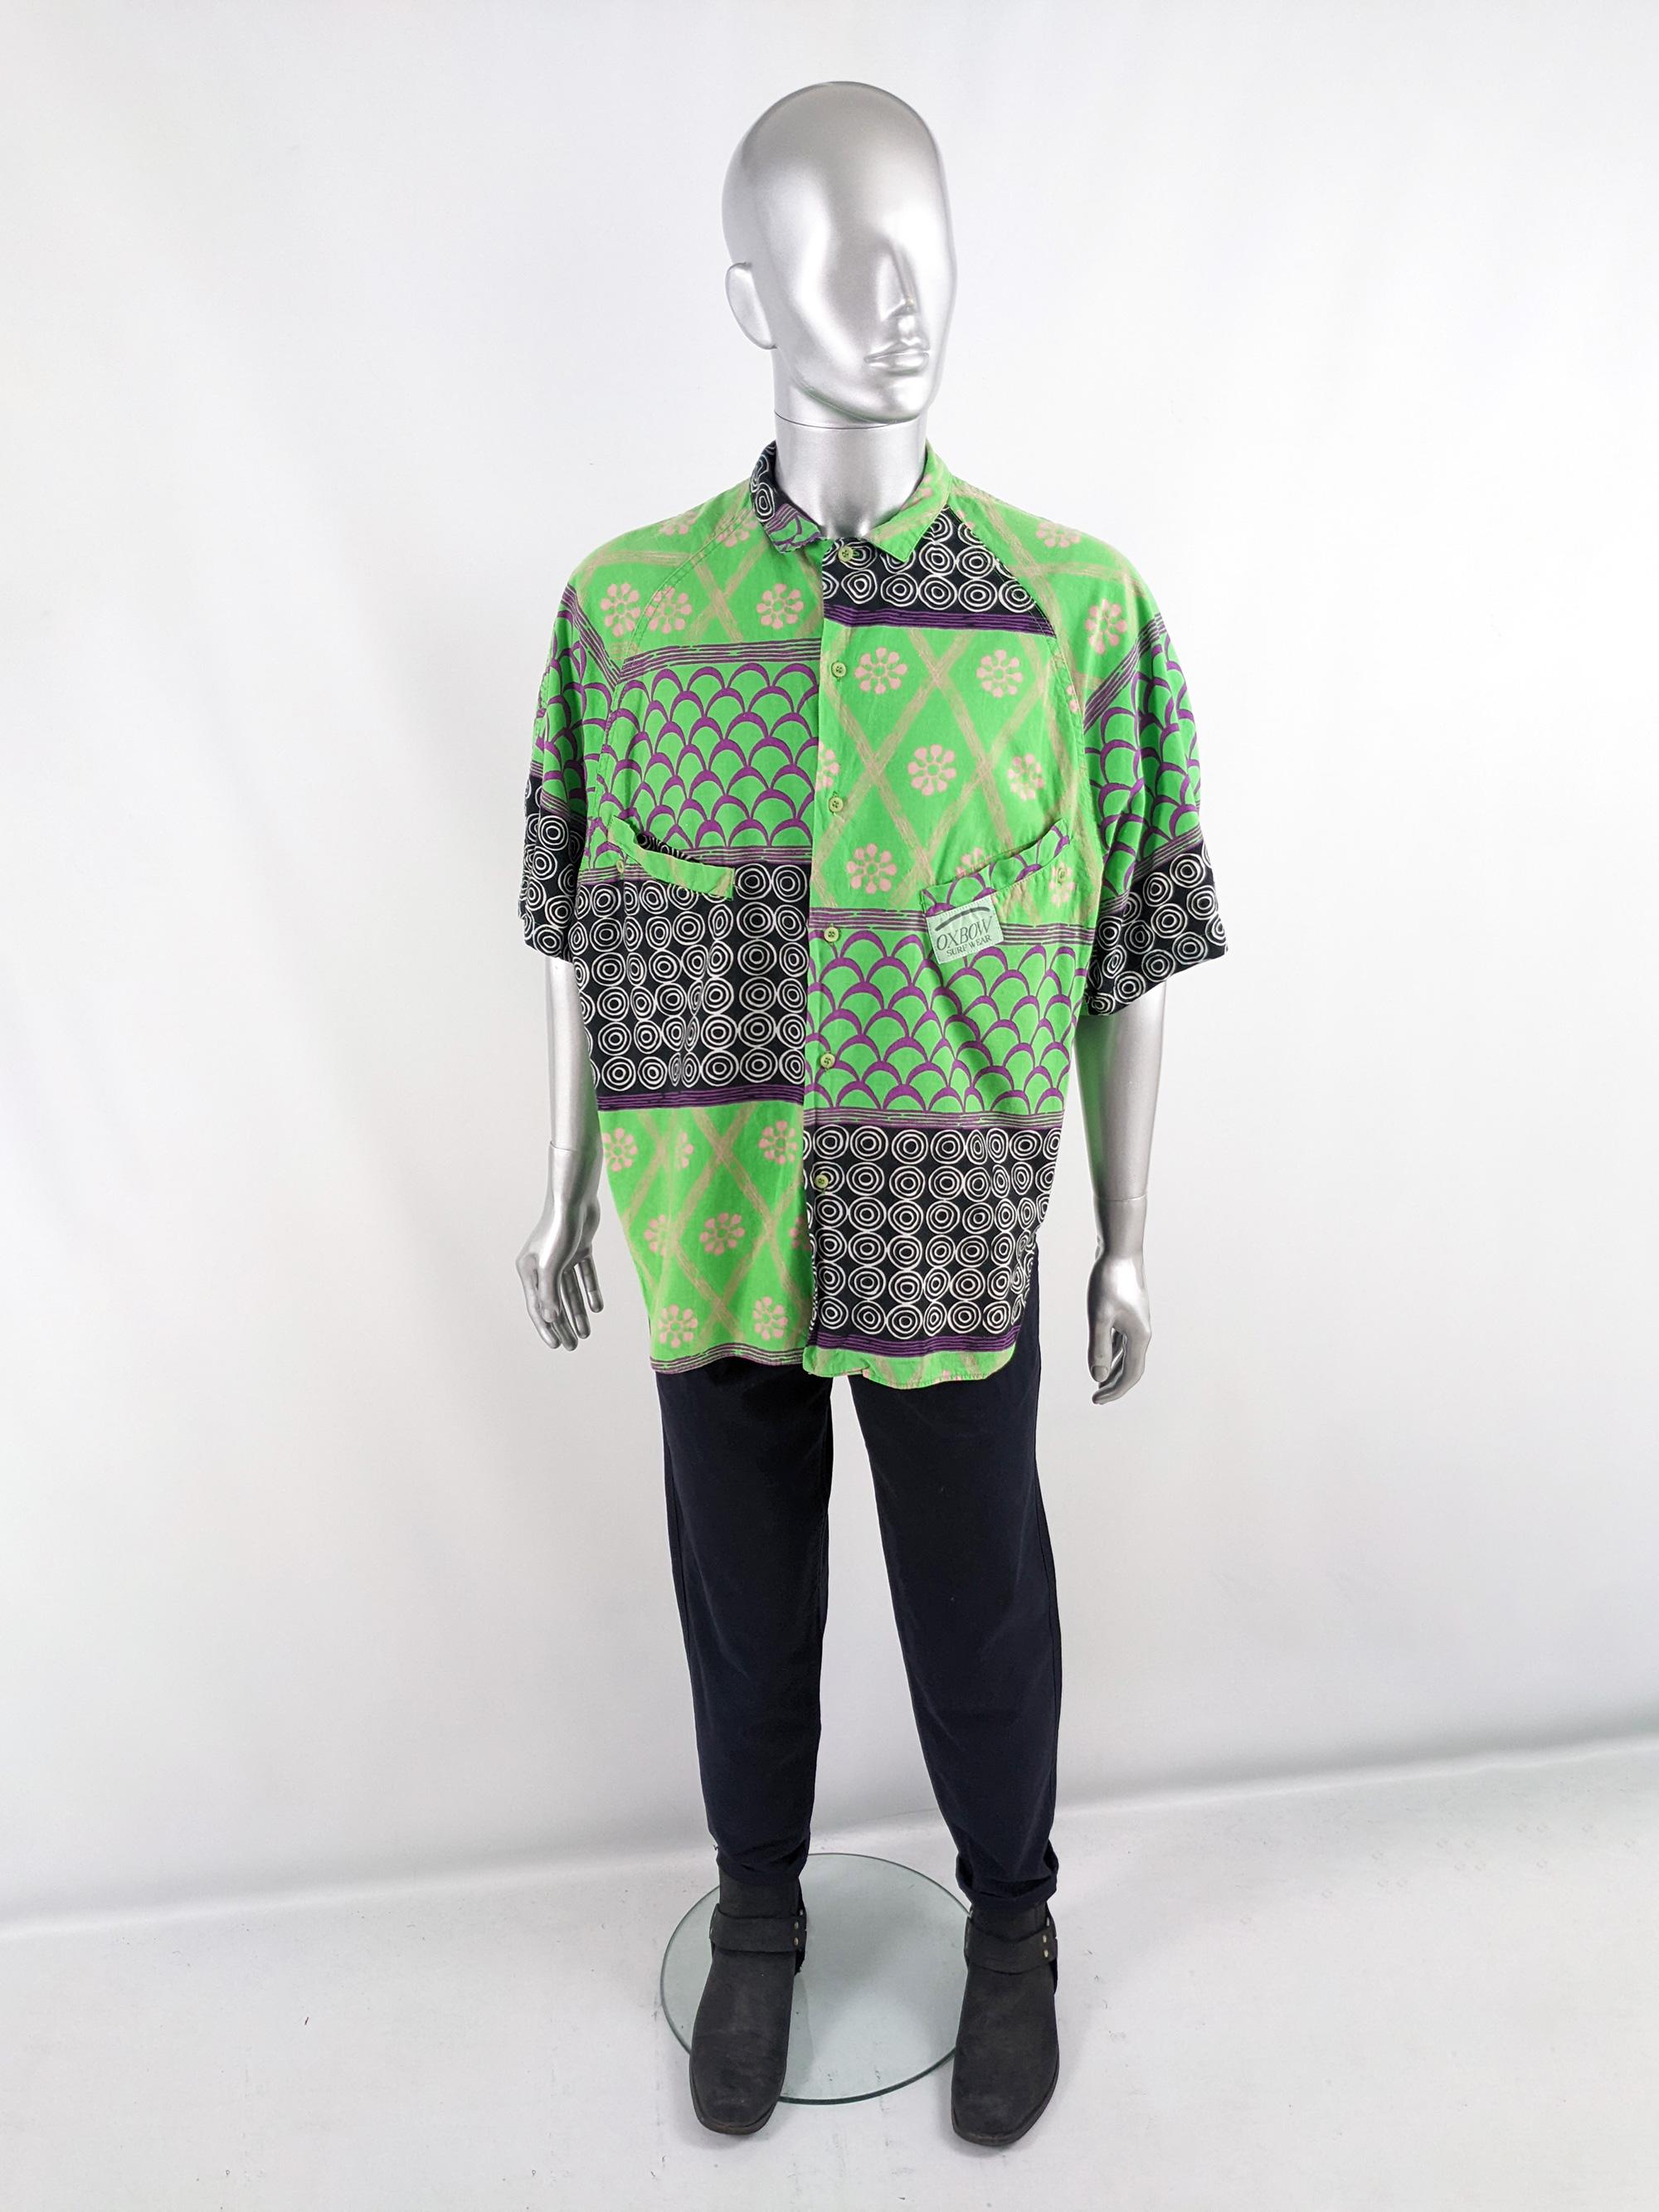 An incredible and bold vintage mens shirt from the late 80s by cult French label, Oxbow. Made in France, from a green, black and purple patchwork printed cotton. It has an oversized fit on top that slightly tapers in towards the bottom to create a